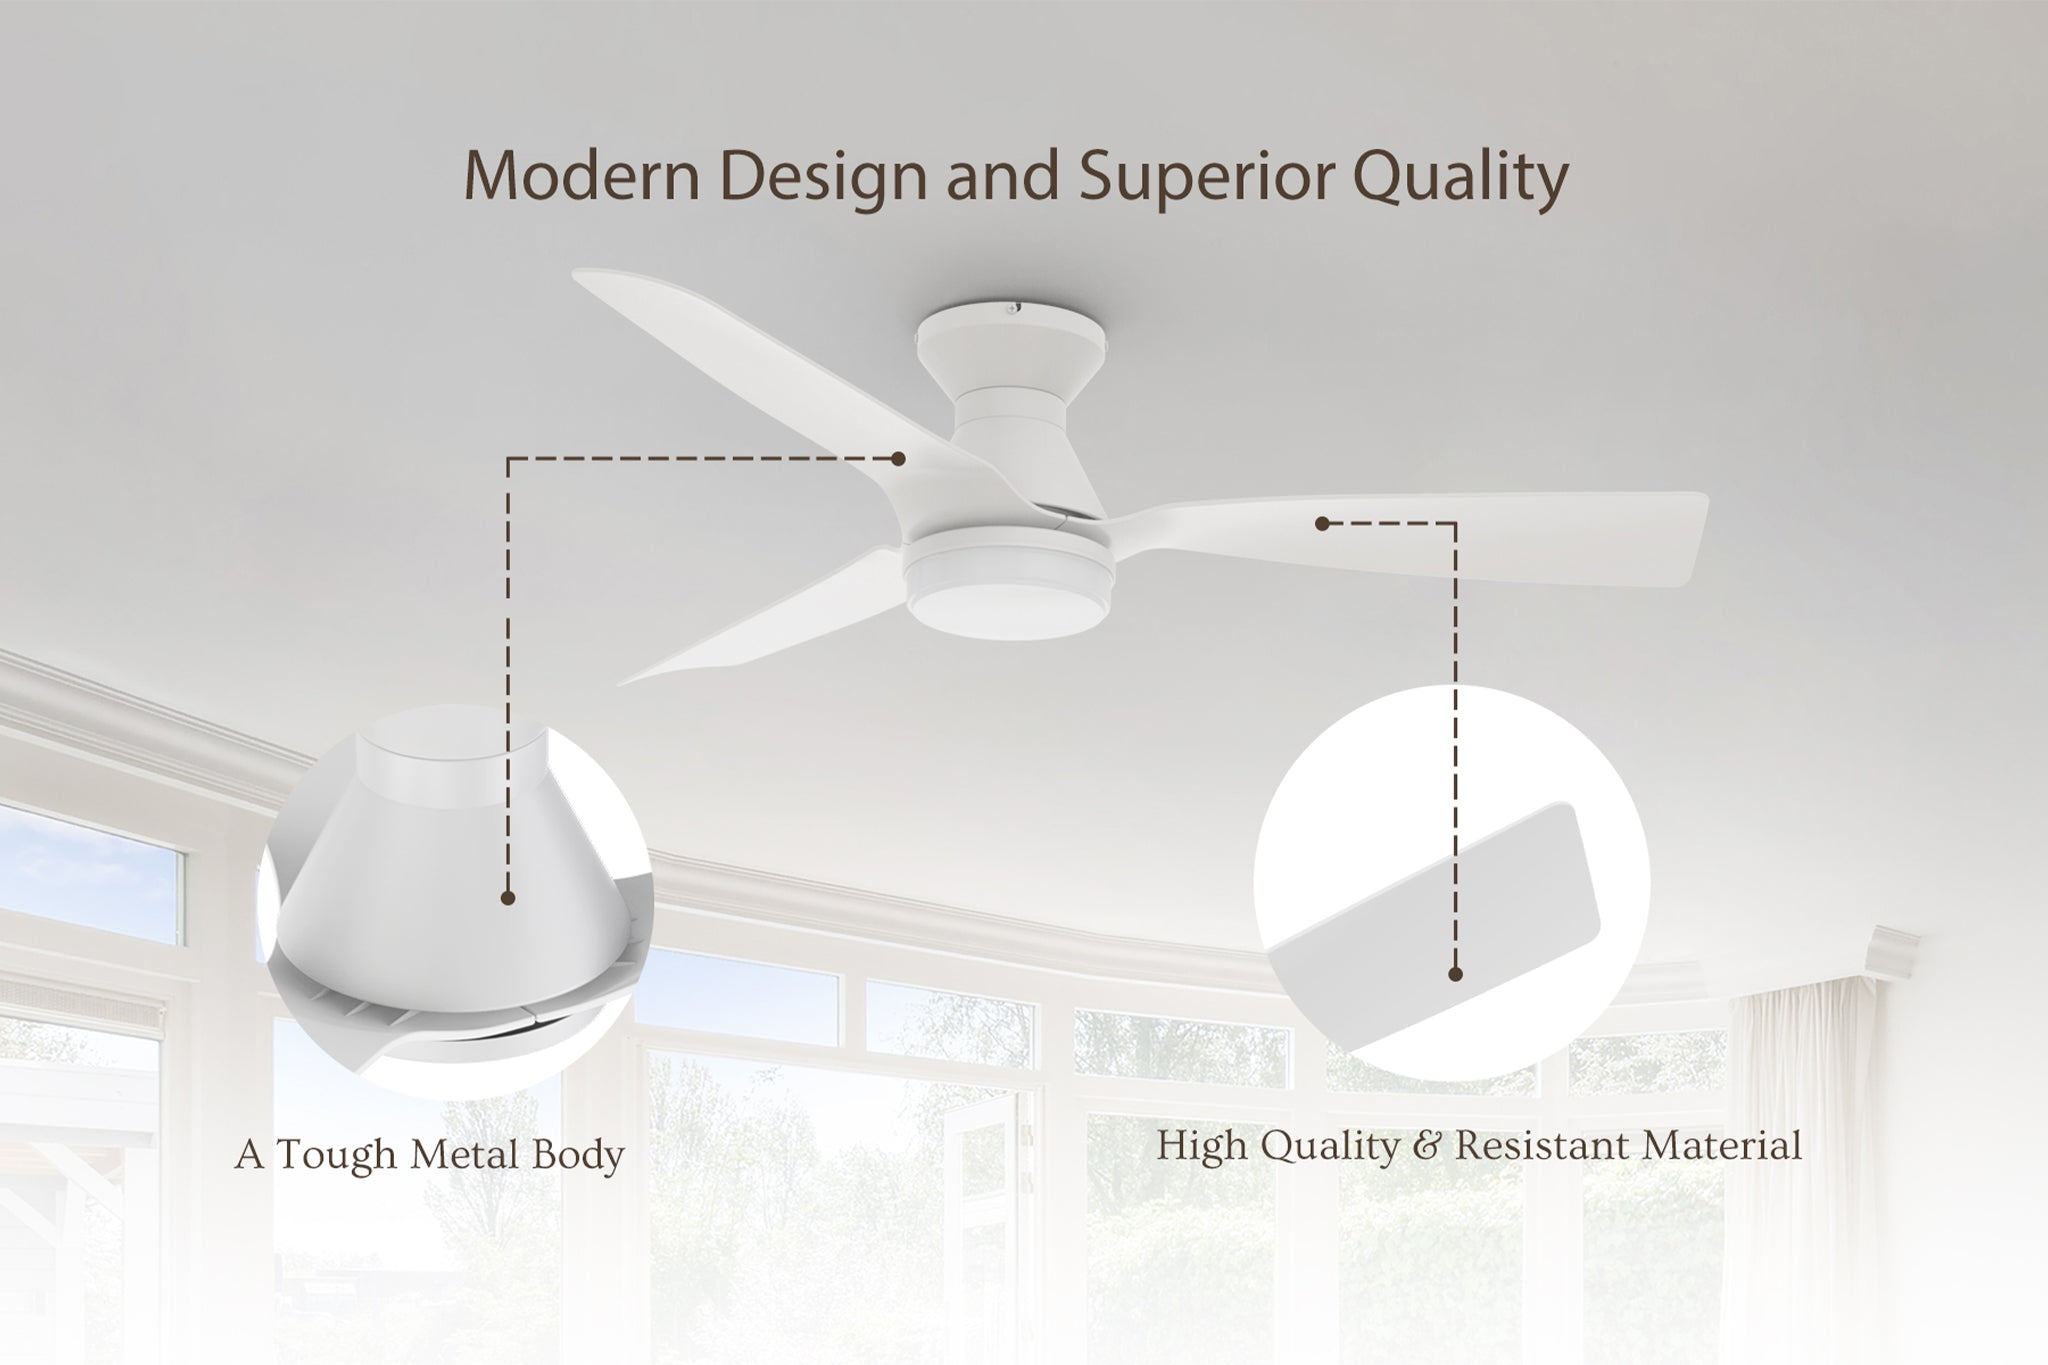 52-inch remote ceiling fan with 3 white blades